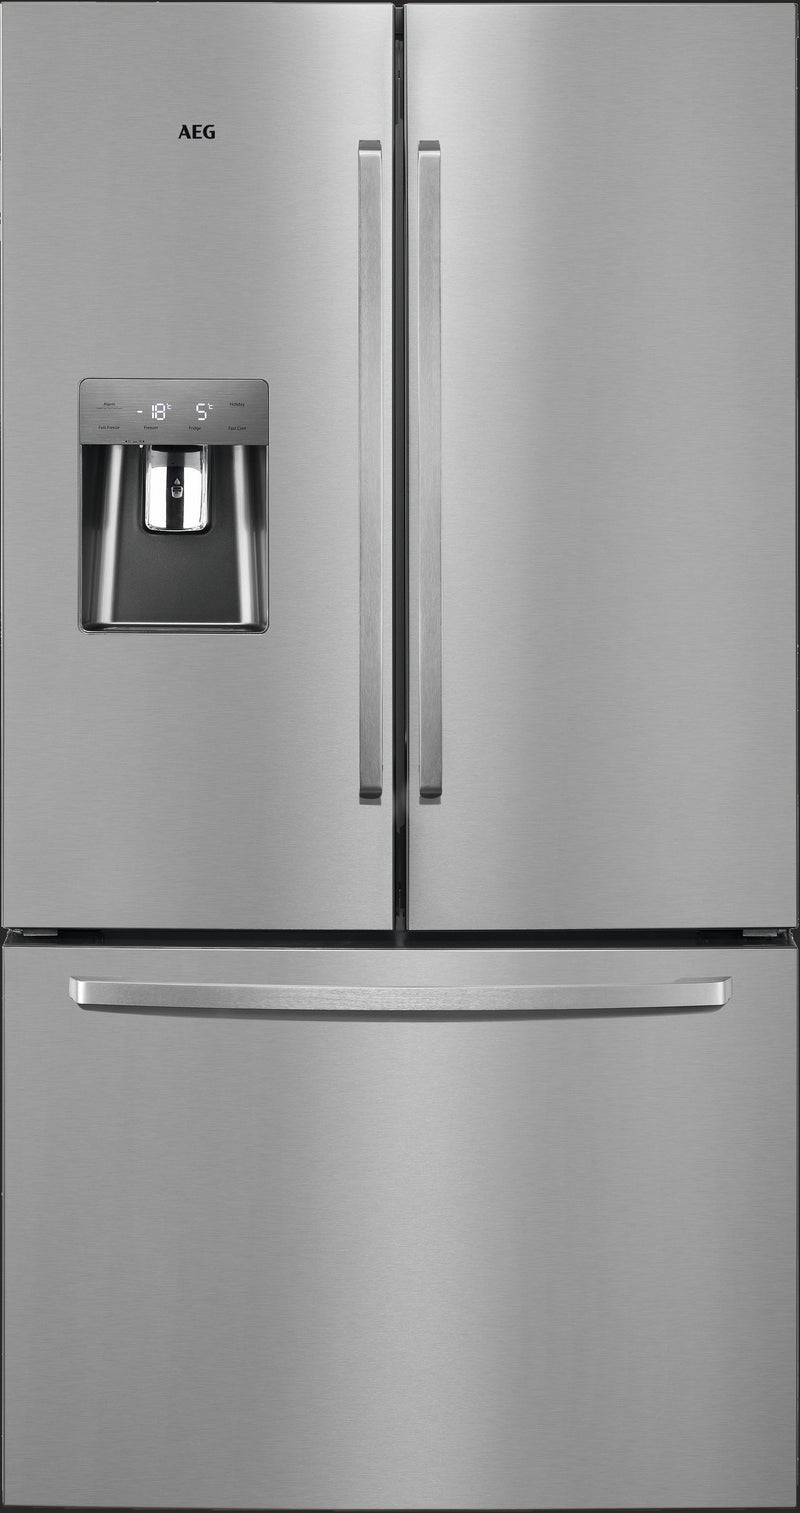 AEG 536L Freestanding French Doors Stainless Steel No Frost Fridge with Water Dispenser - RMB76312NX - Showroom Display Promo till stock last